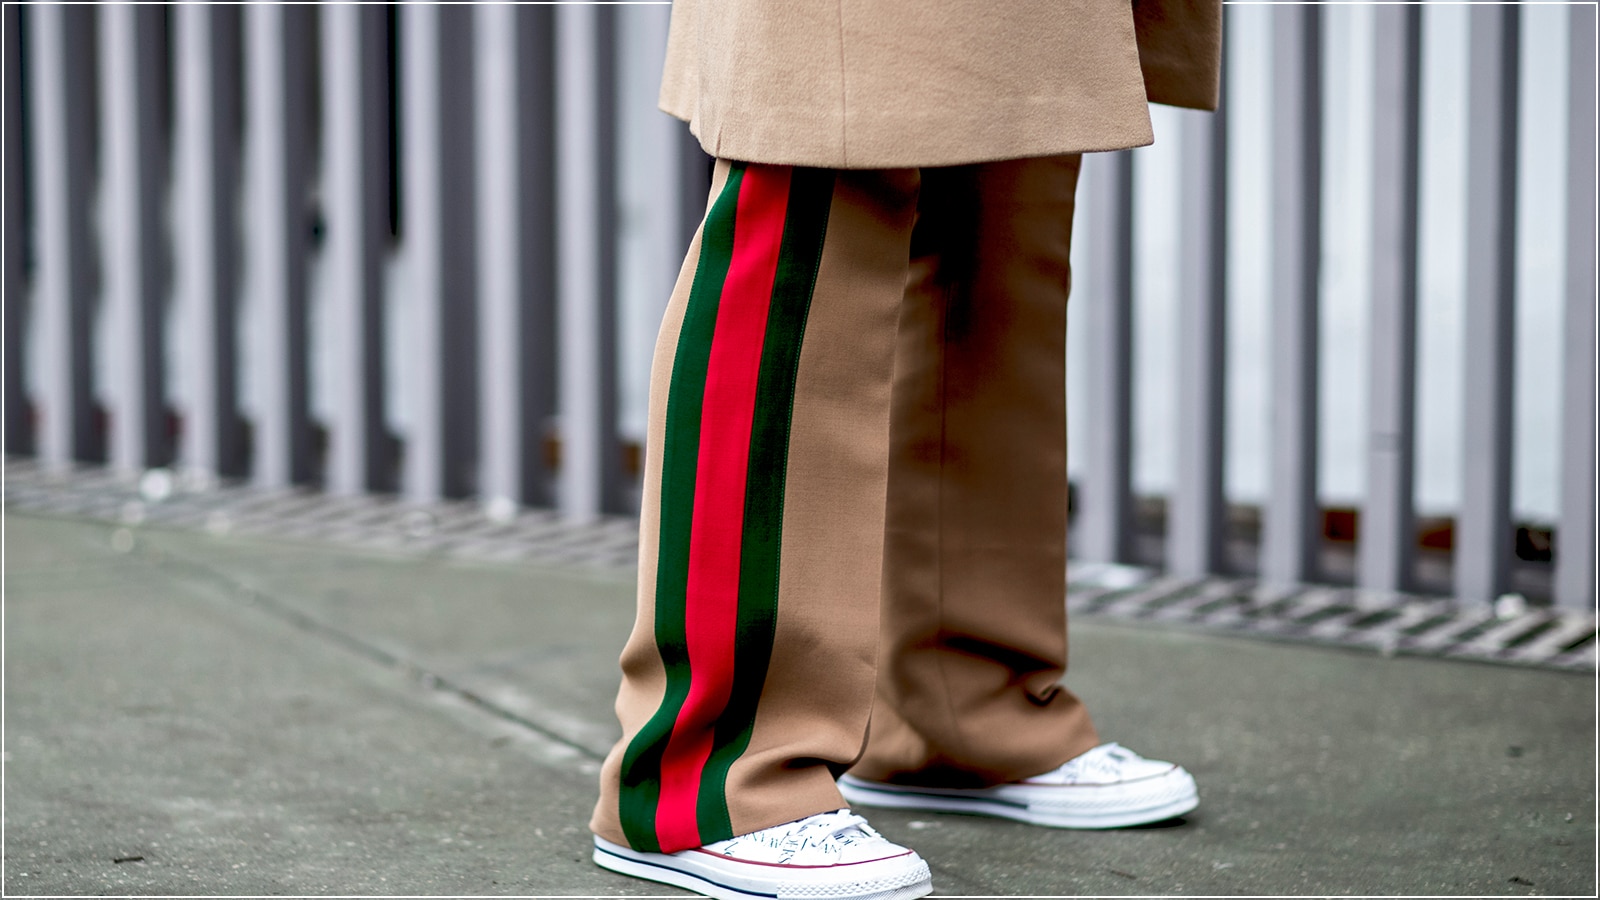 How To Trade Up Your Skinny Jeans For Wide-Leg Pants | The Journal | MR  PORTER